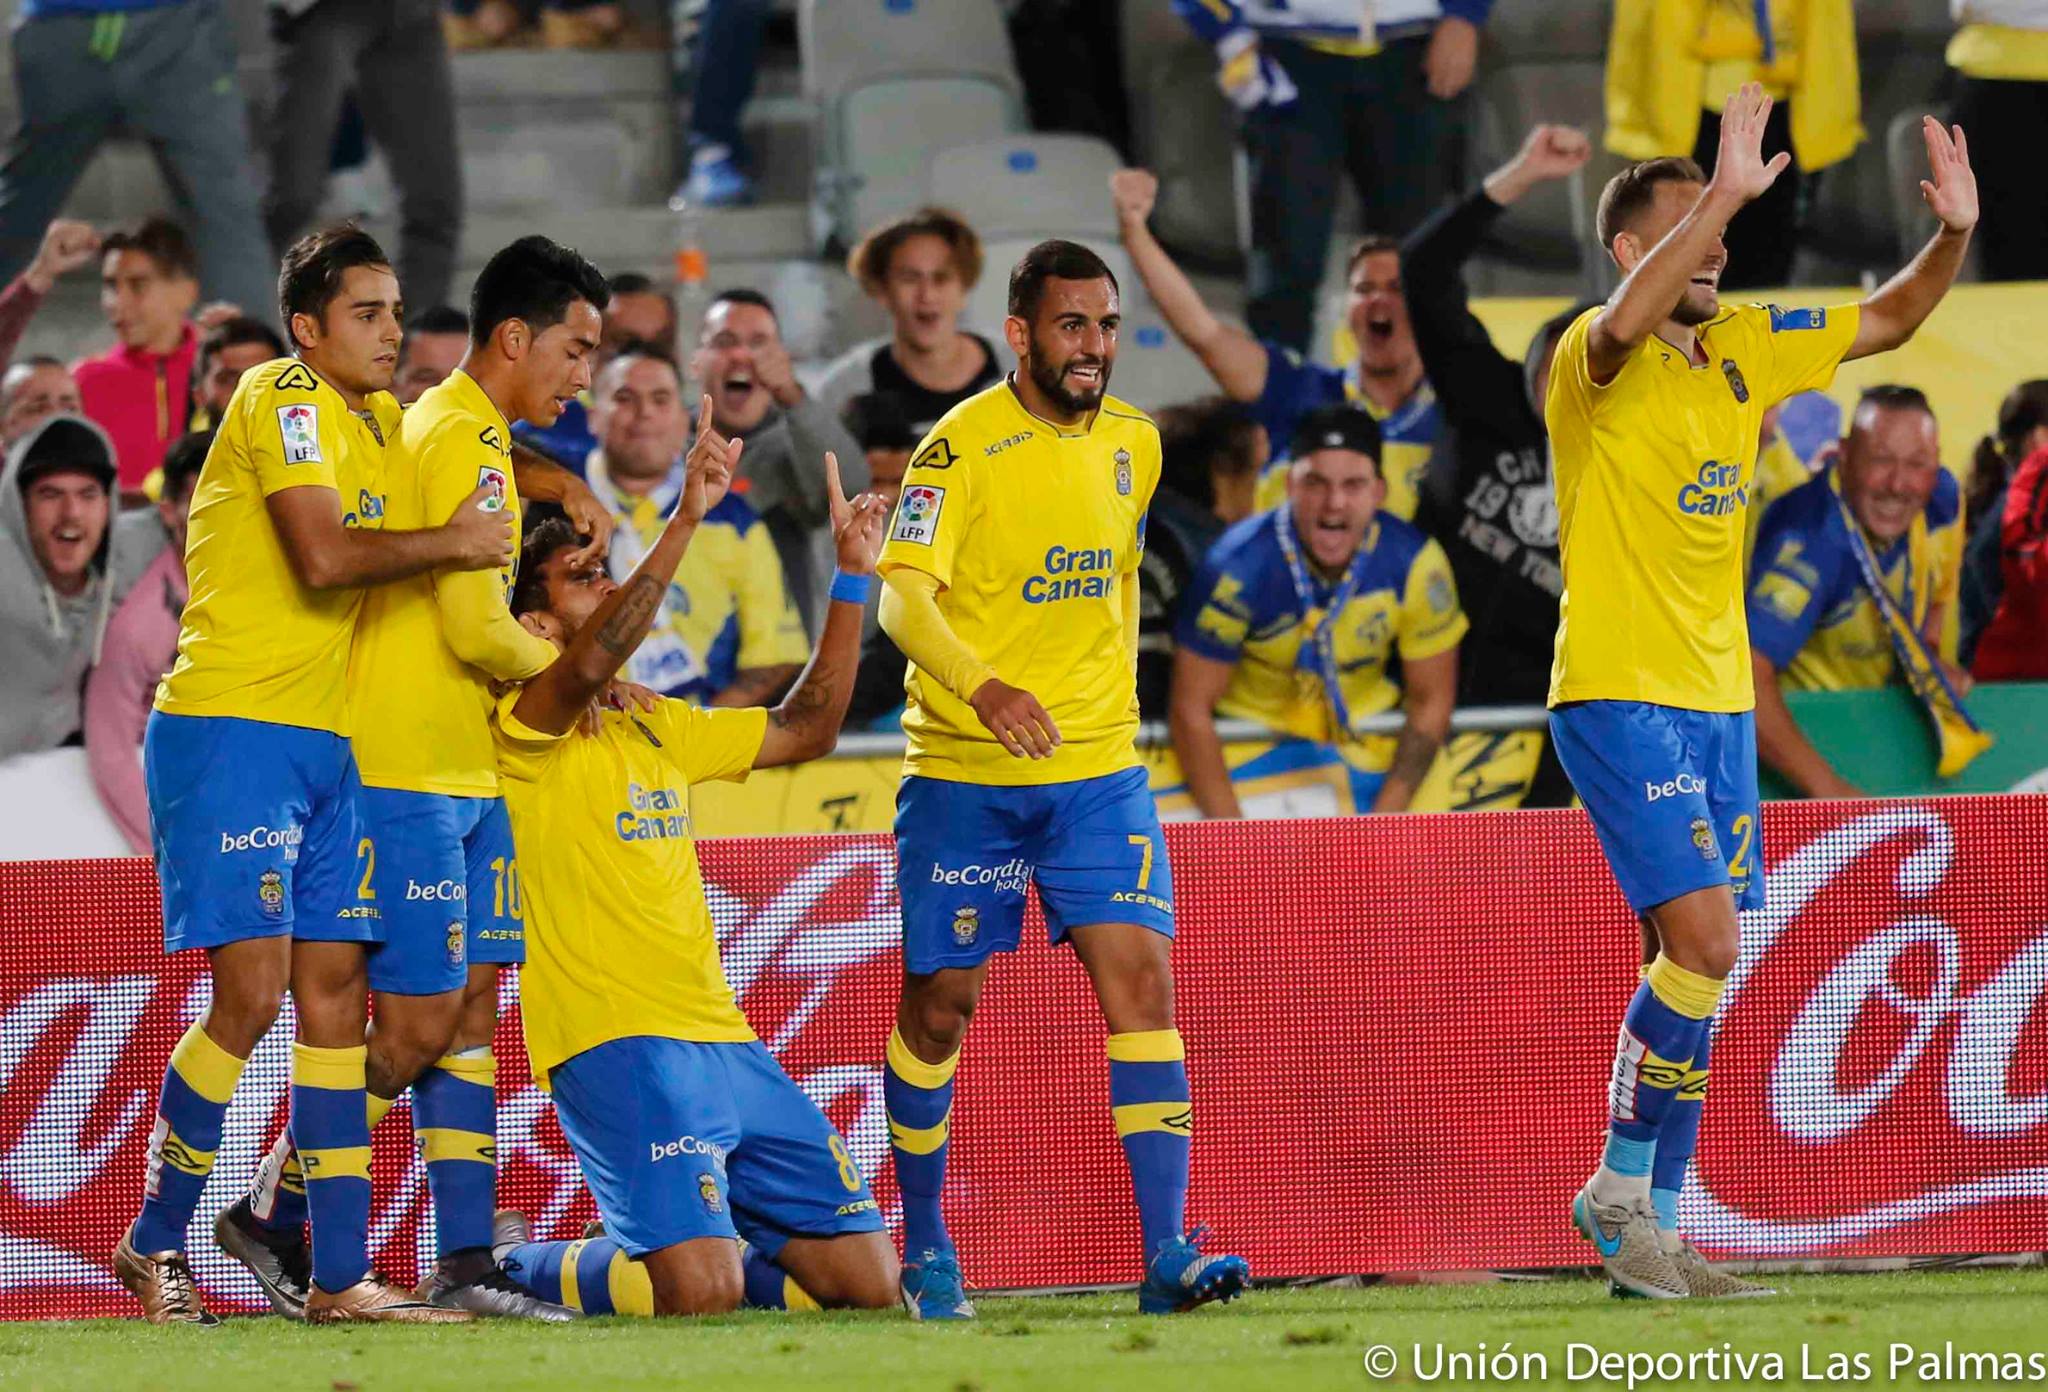 Will UD Las Palmas be able to return to winning ways when they host Granada next time out?